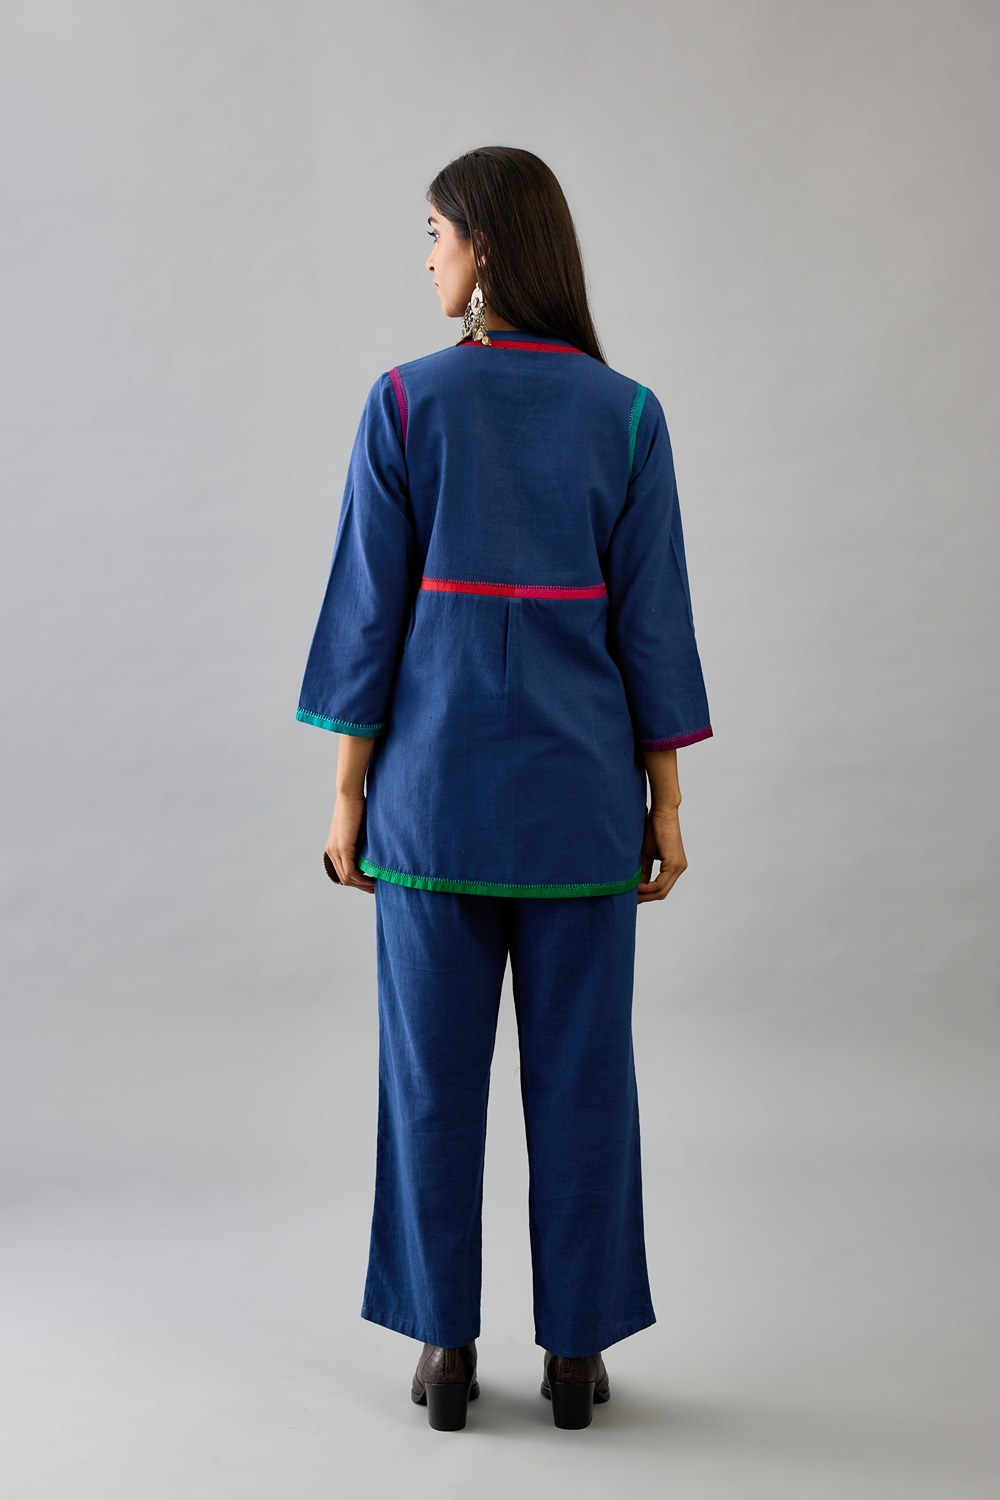 Blue handloom cotton short top paired with blue handloom cotton straight pants